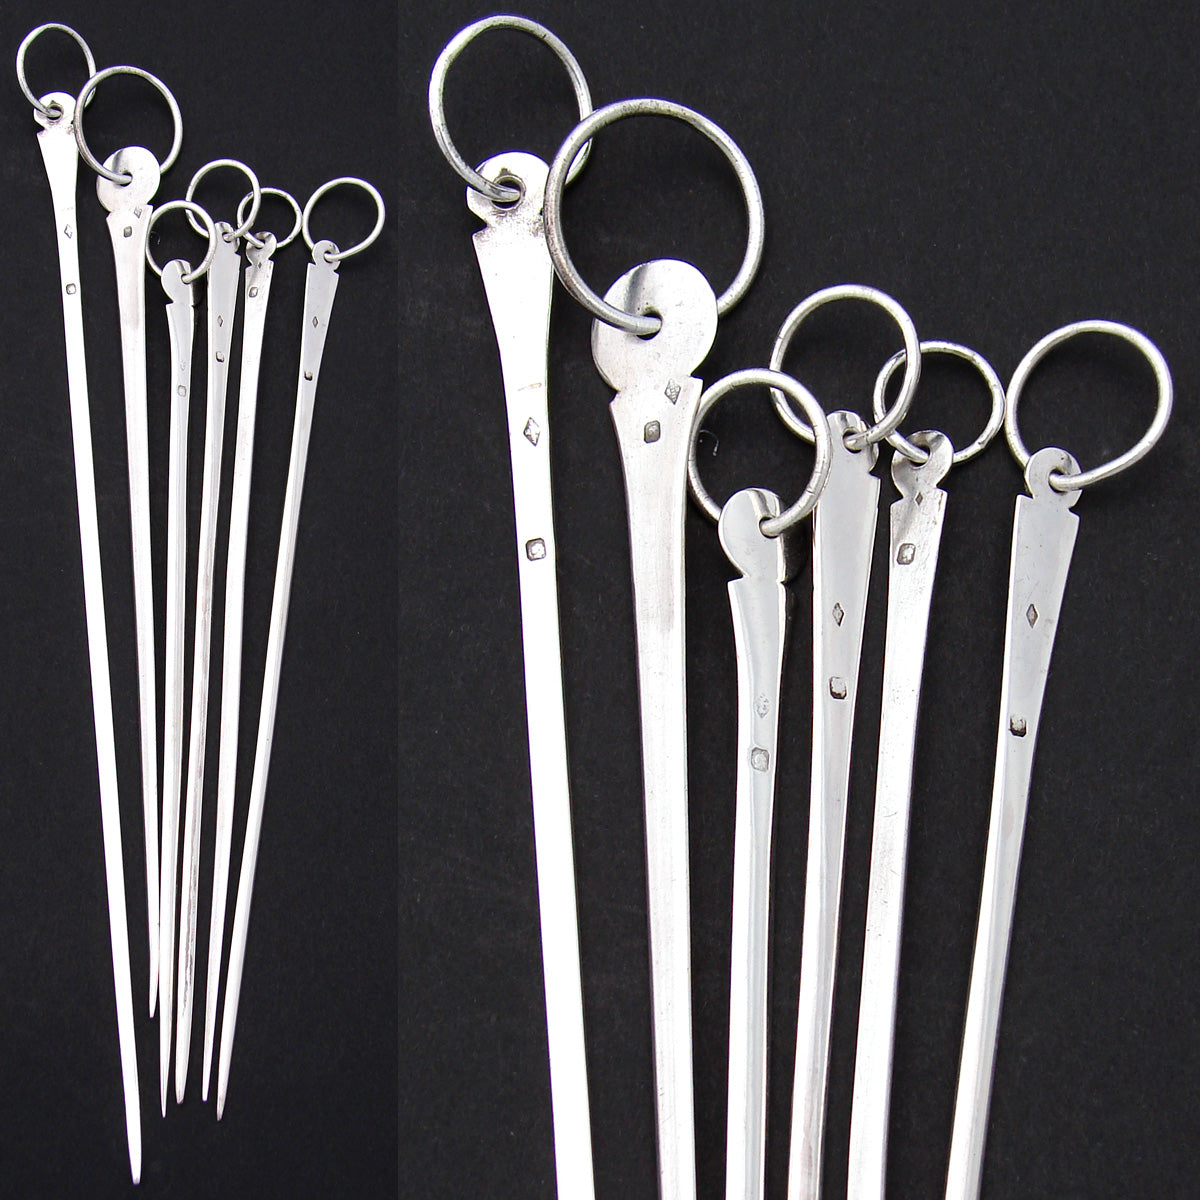 Lovely Antique French Hallmarked Sterling Silver 6pc Skewer or Hatelet Set, 7.75" to 9.75"